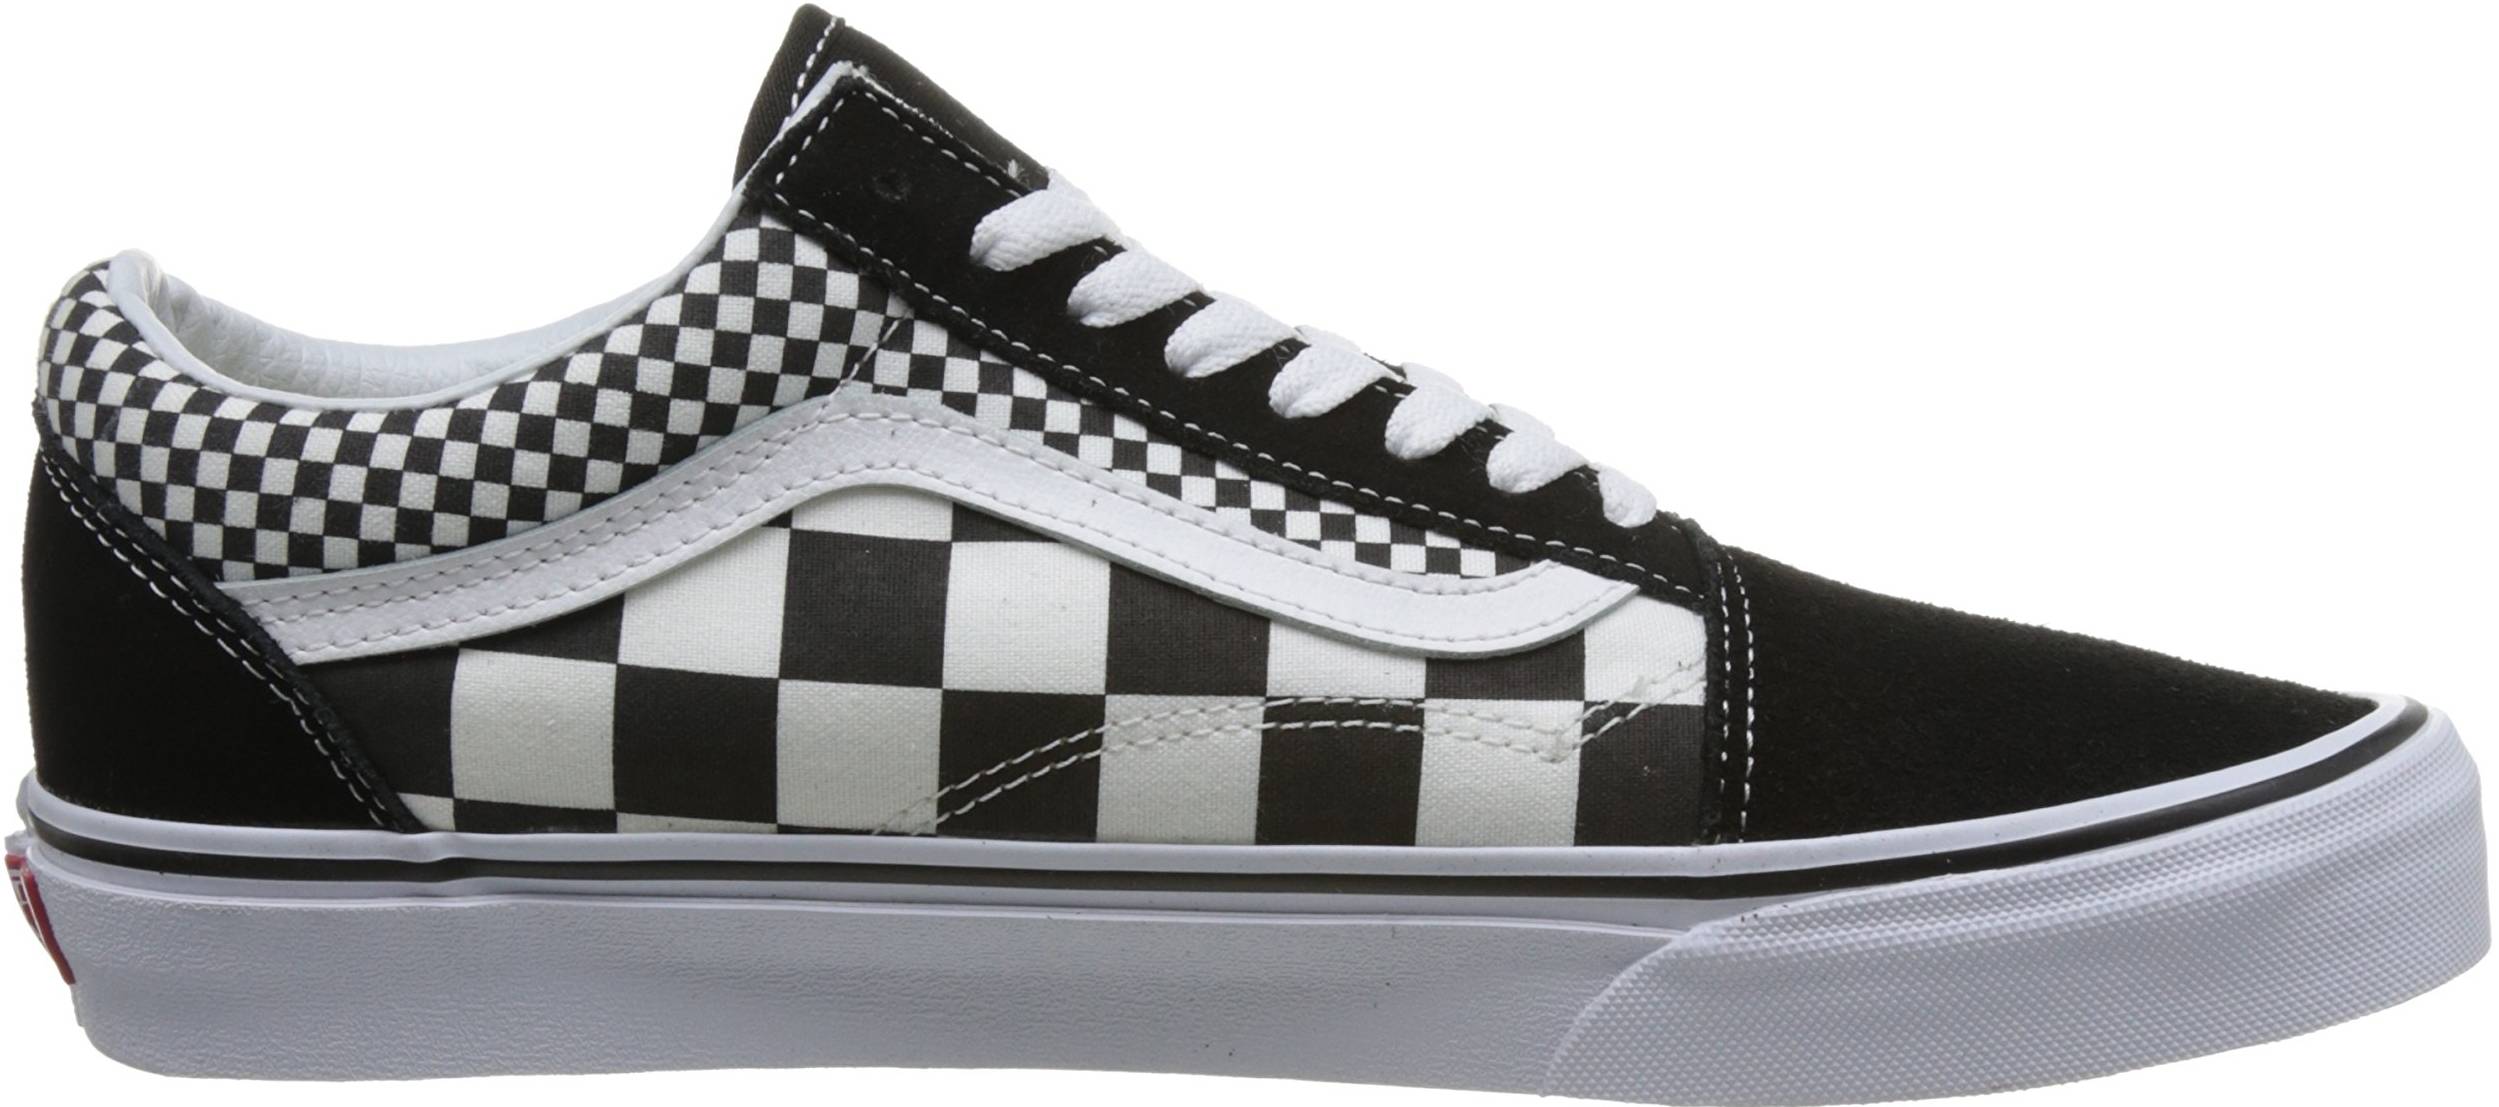 mix checker old skool shoes